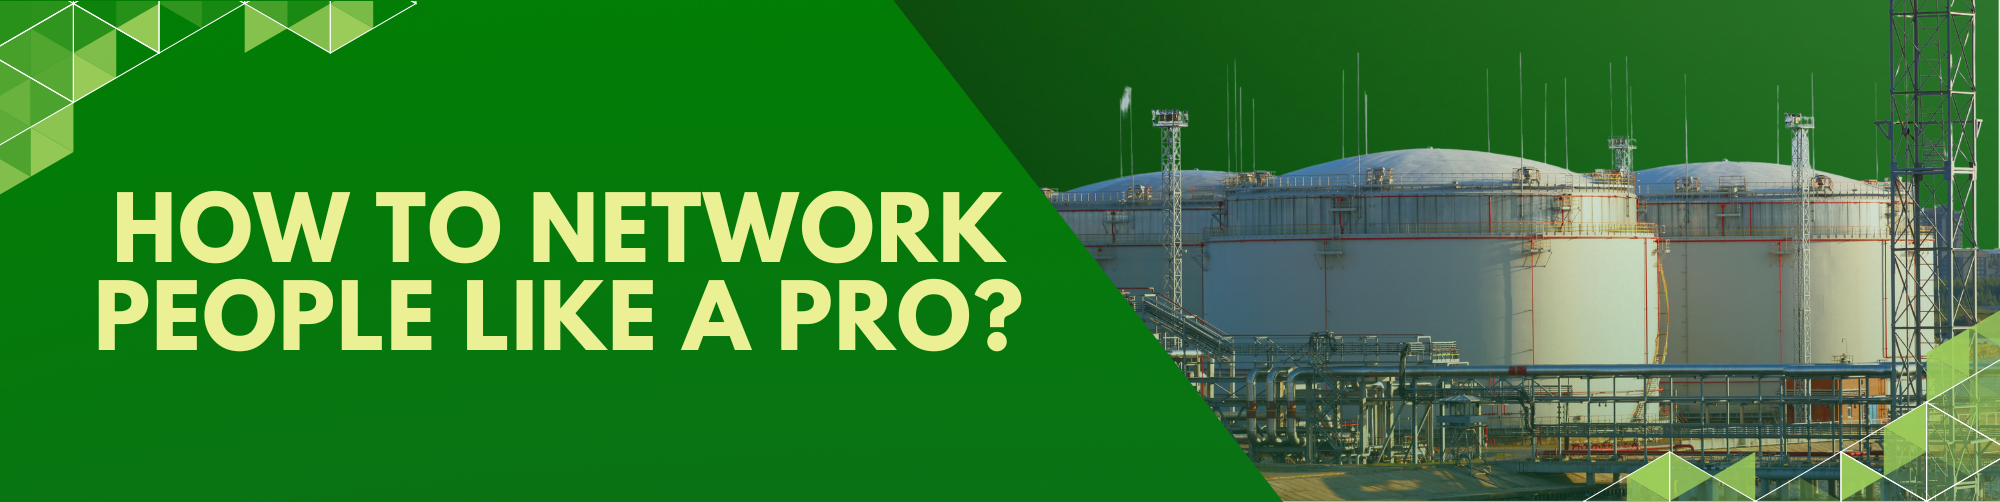 How To Network People Like a Pro Banner 13 -diarynigracia